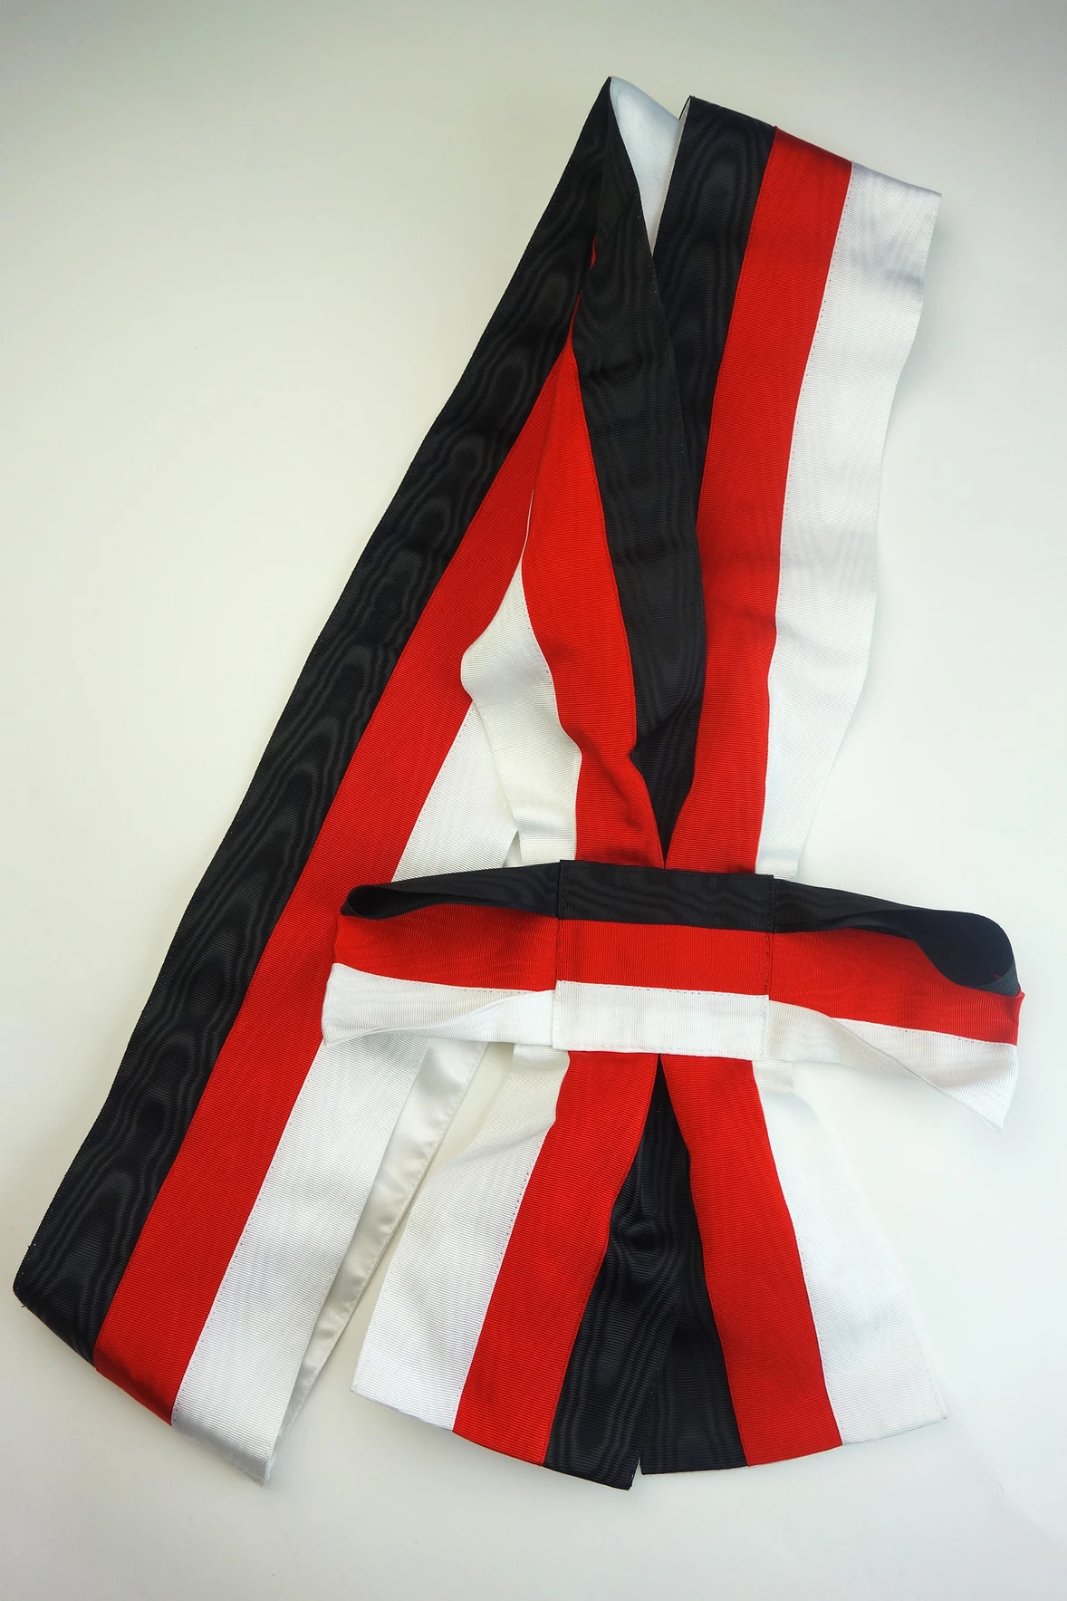 Knights Templar - (KCT) Knight Commander of the Temple - Tri-Coloured Sash